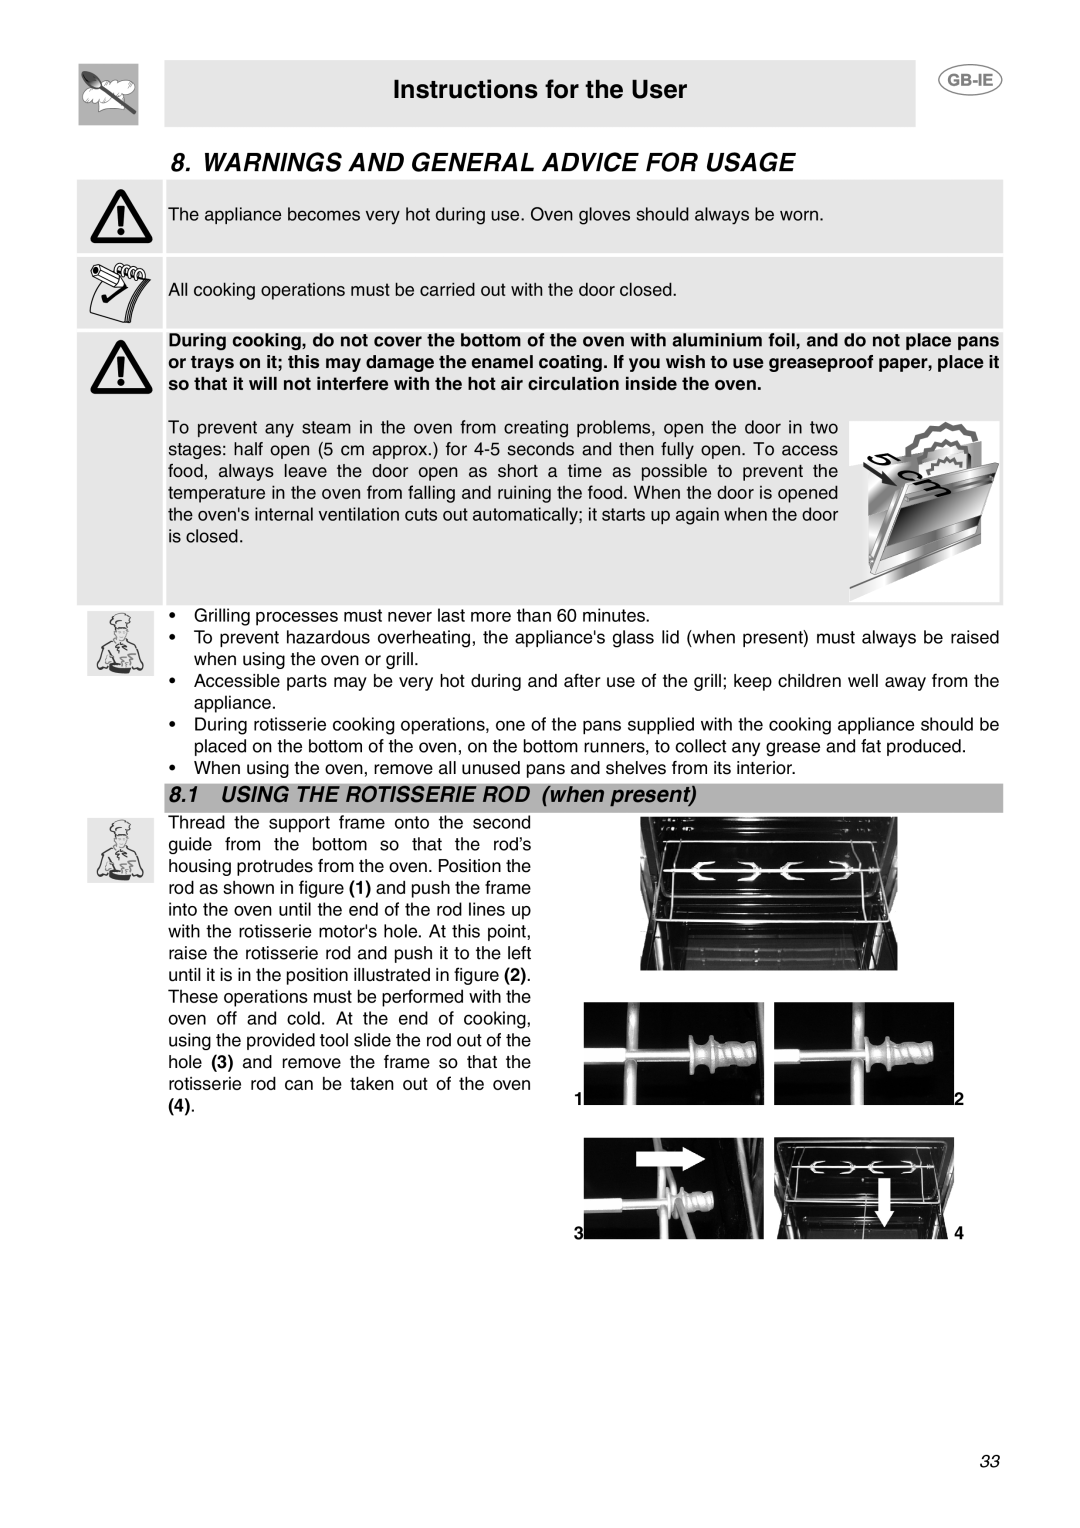 Smeg CE9CMX manual Warnings And General Advice For Usage, USING THE ROTISSERIE ROD when present, Instructions for the User 